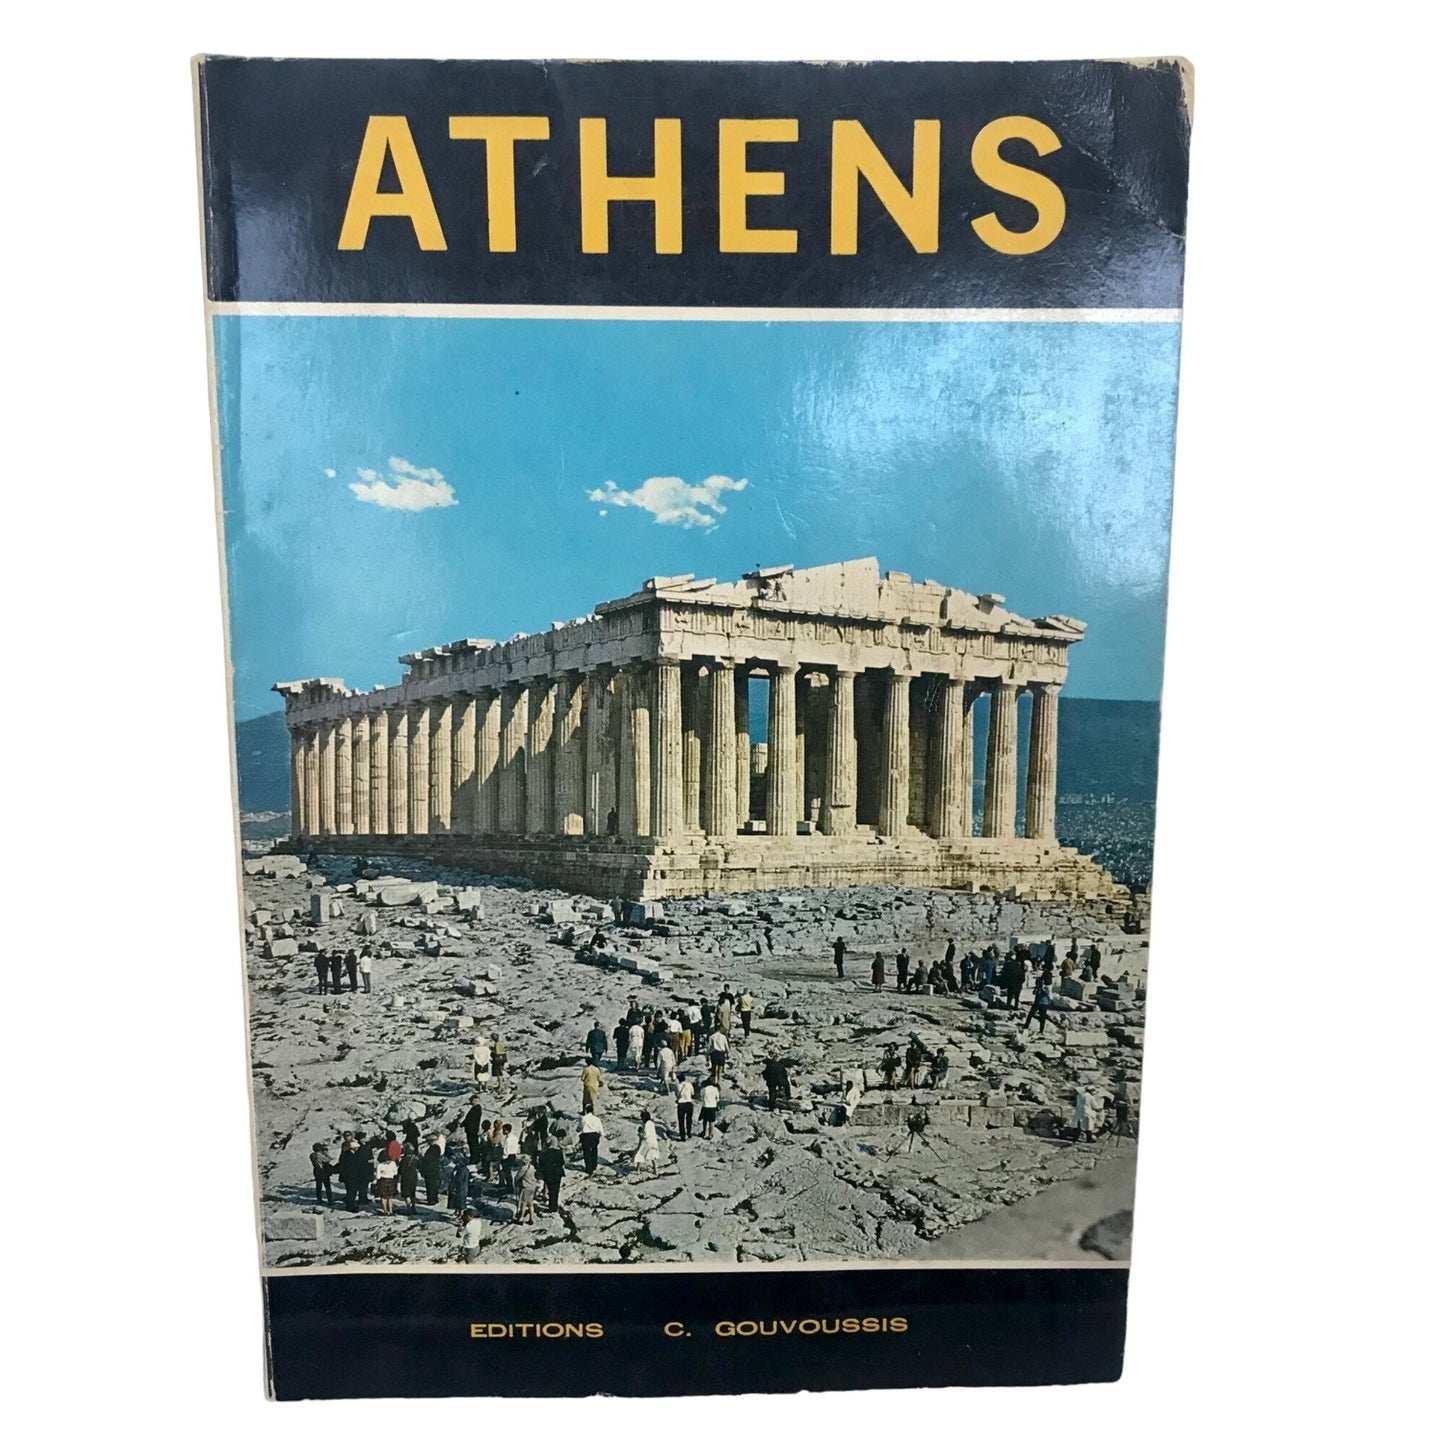 Vintage Athens Book Travel Greece Editions C. Gouvoussis